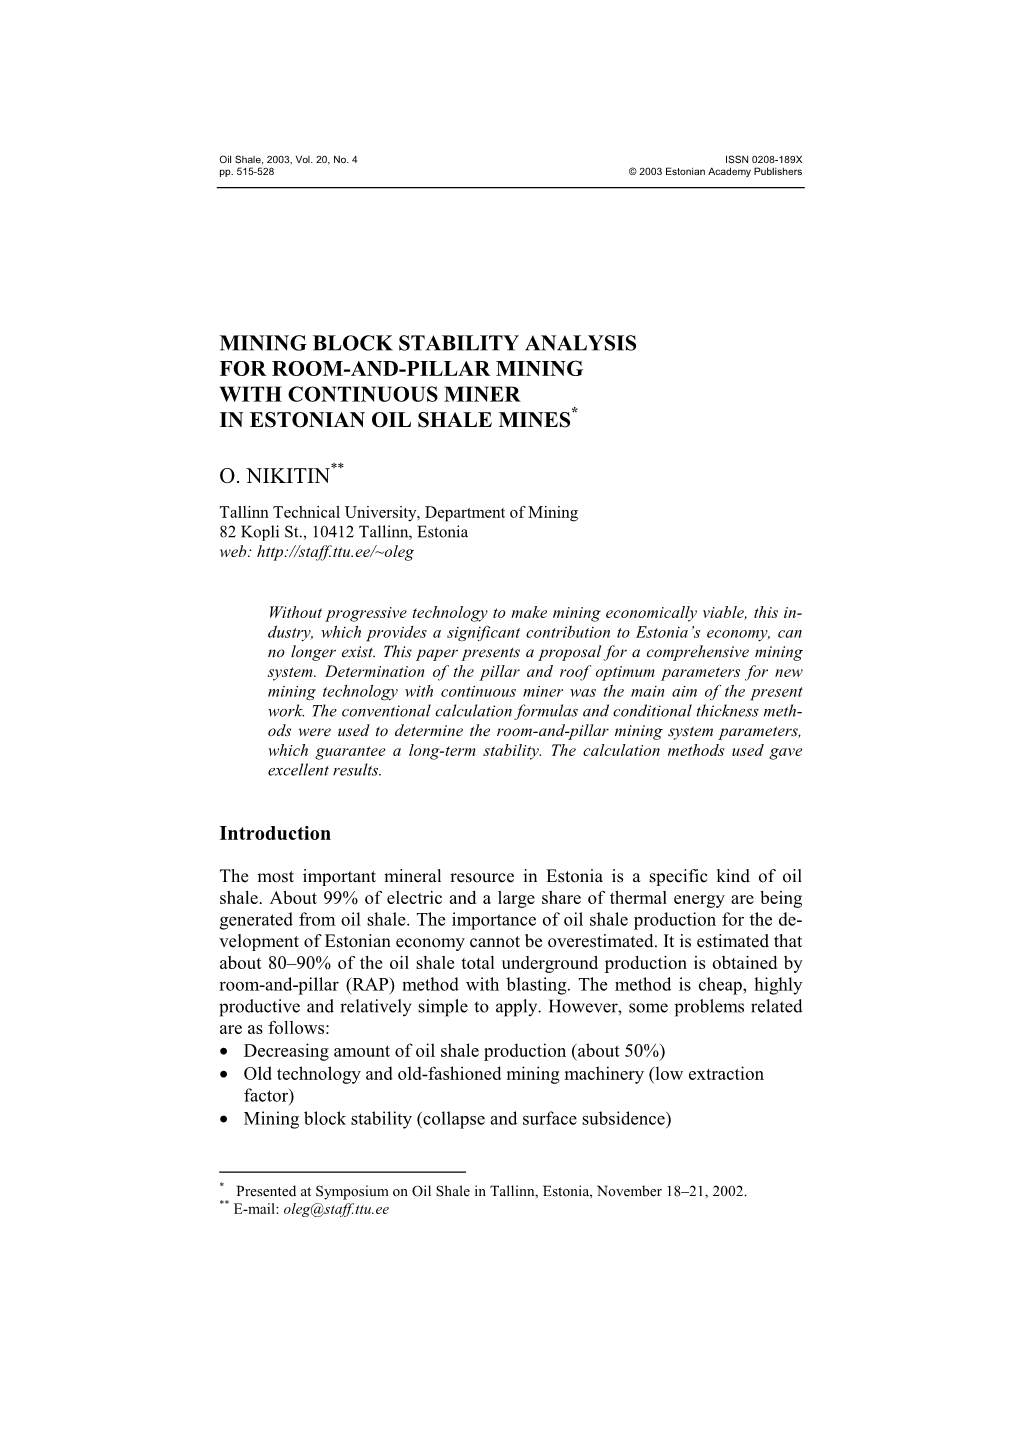 Mining Block Stability Analysis for Room-And-Pillar Mining with Continuous Miner in Estonian Oil Shale Mines*